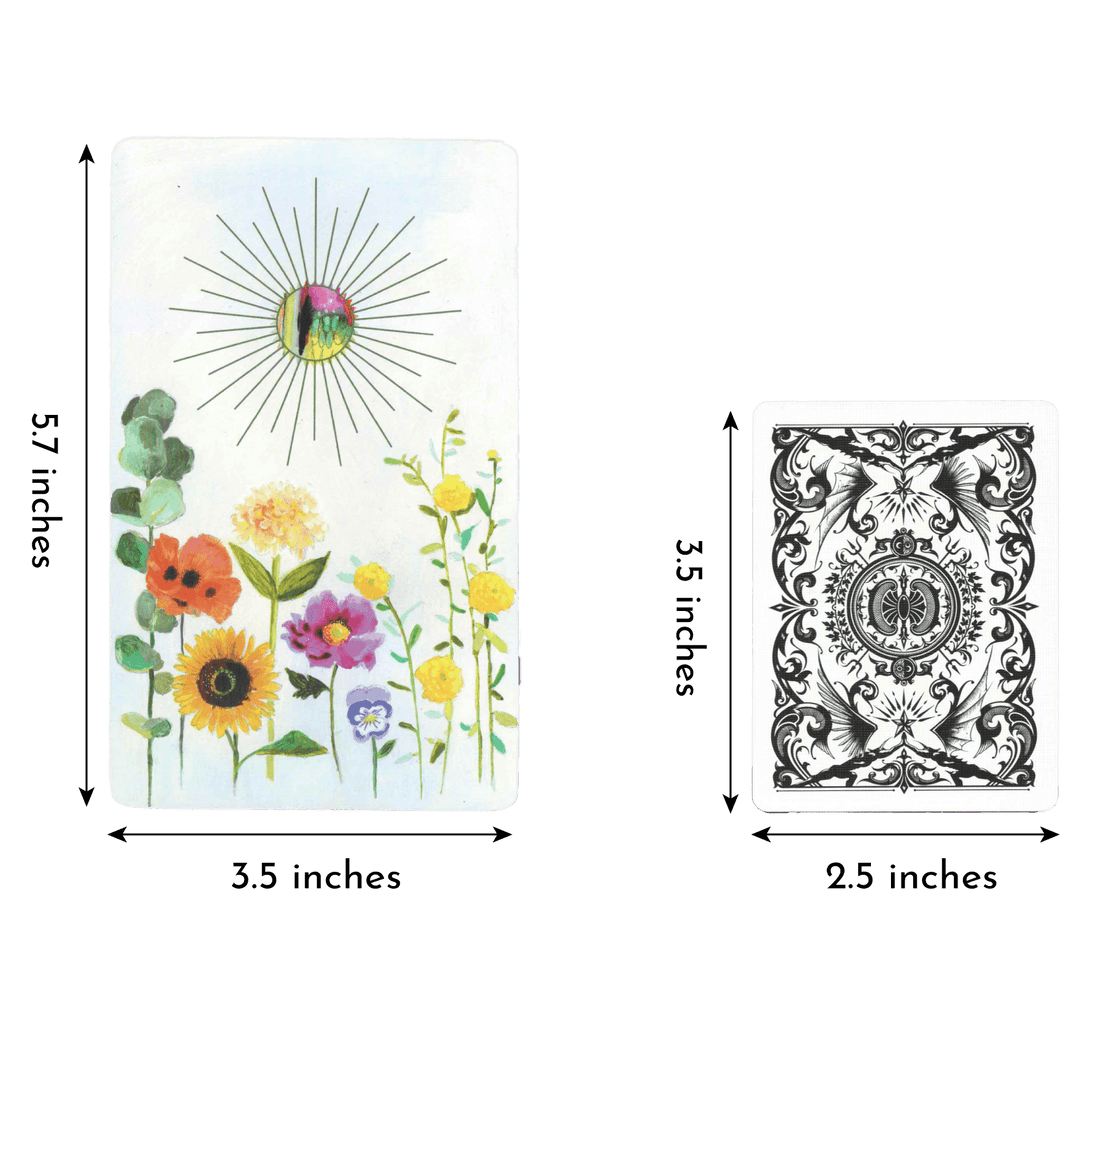 Flower Medicine Oracle Deck by Cathy Nichols. Comparing card in deck with regular playing card. Flower card has height 5.7 inches and width 3.5 inches.